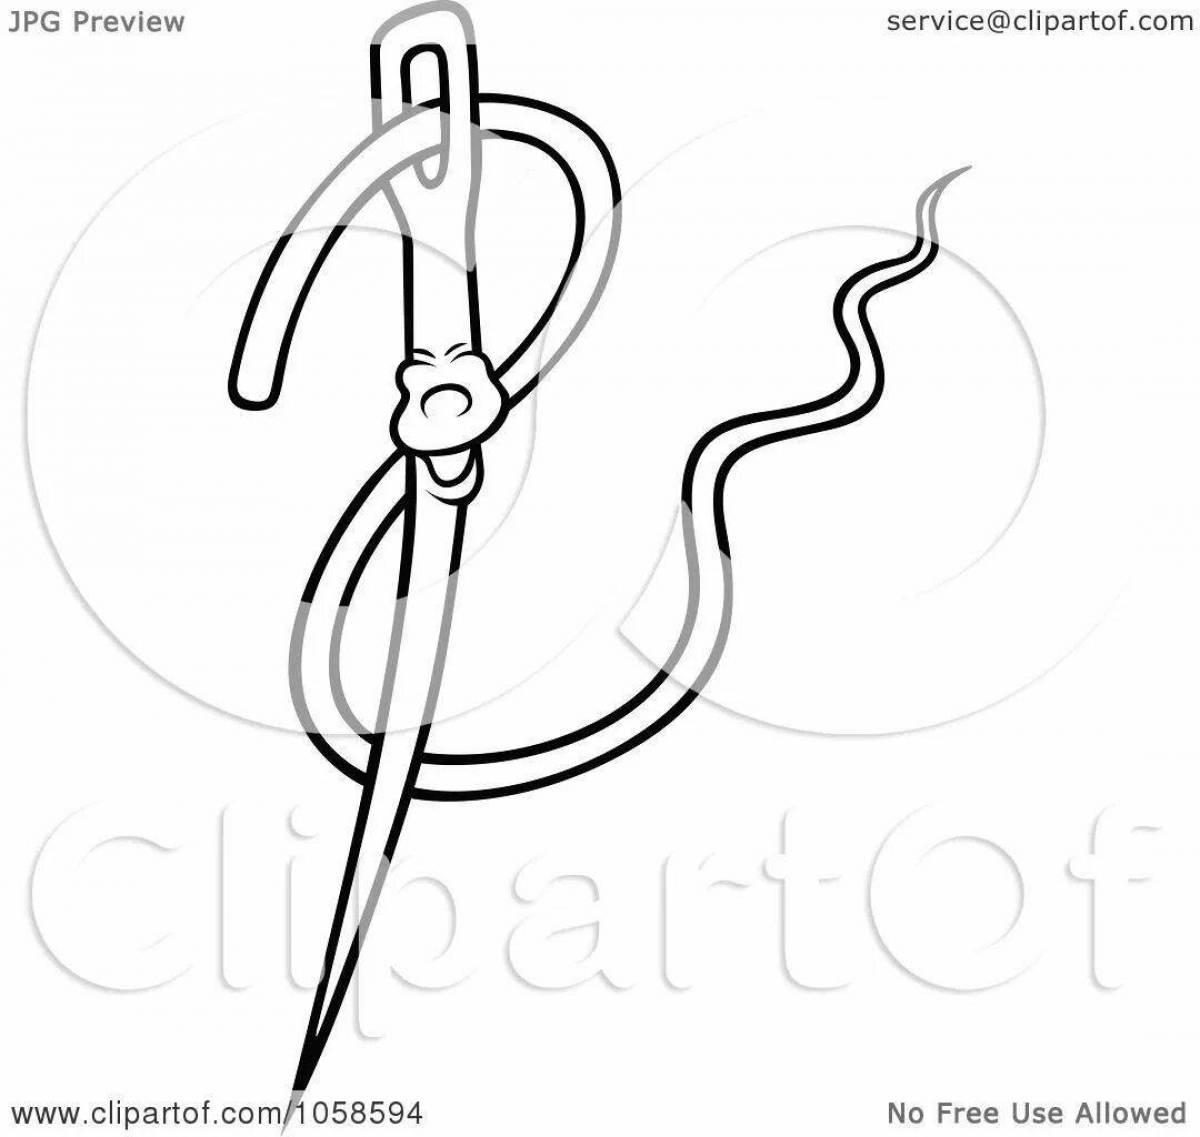 Attractive youth needle coloring page